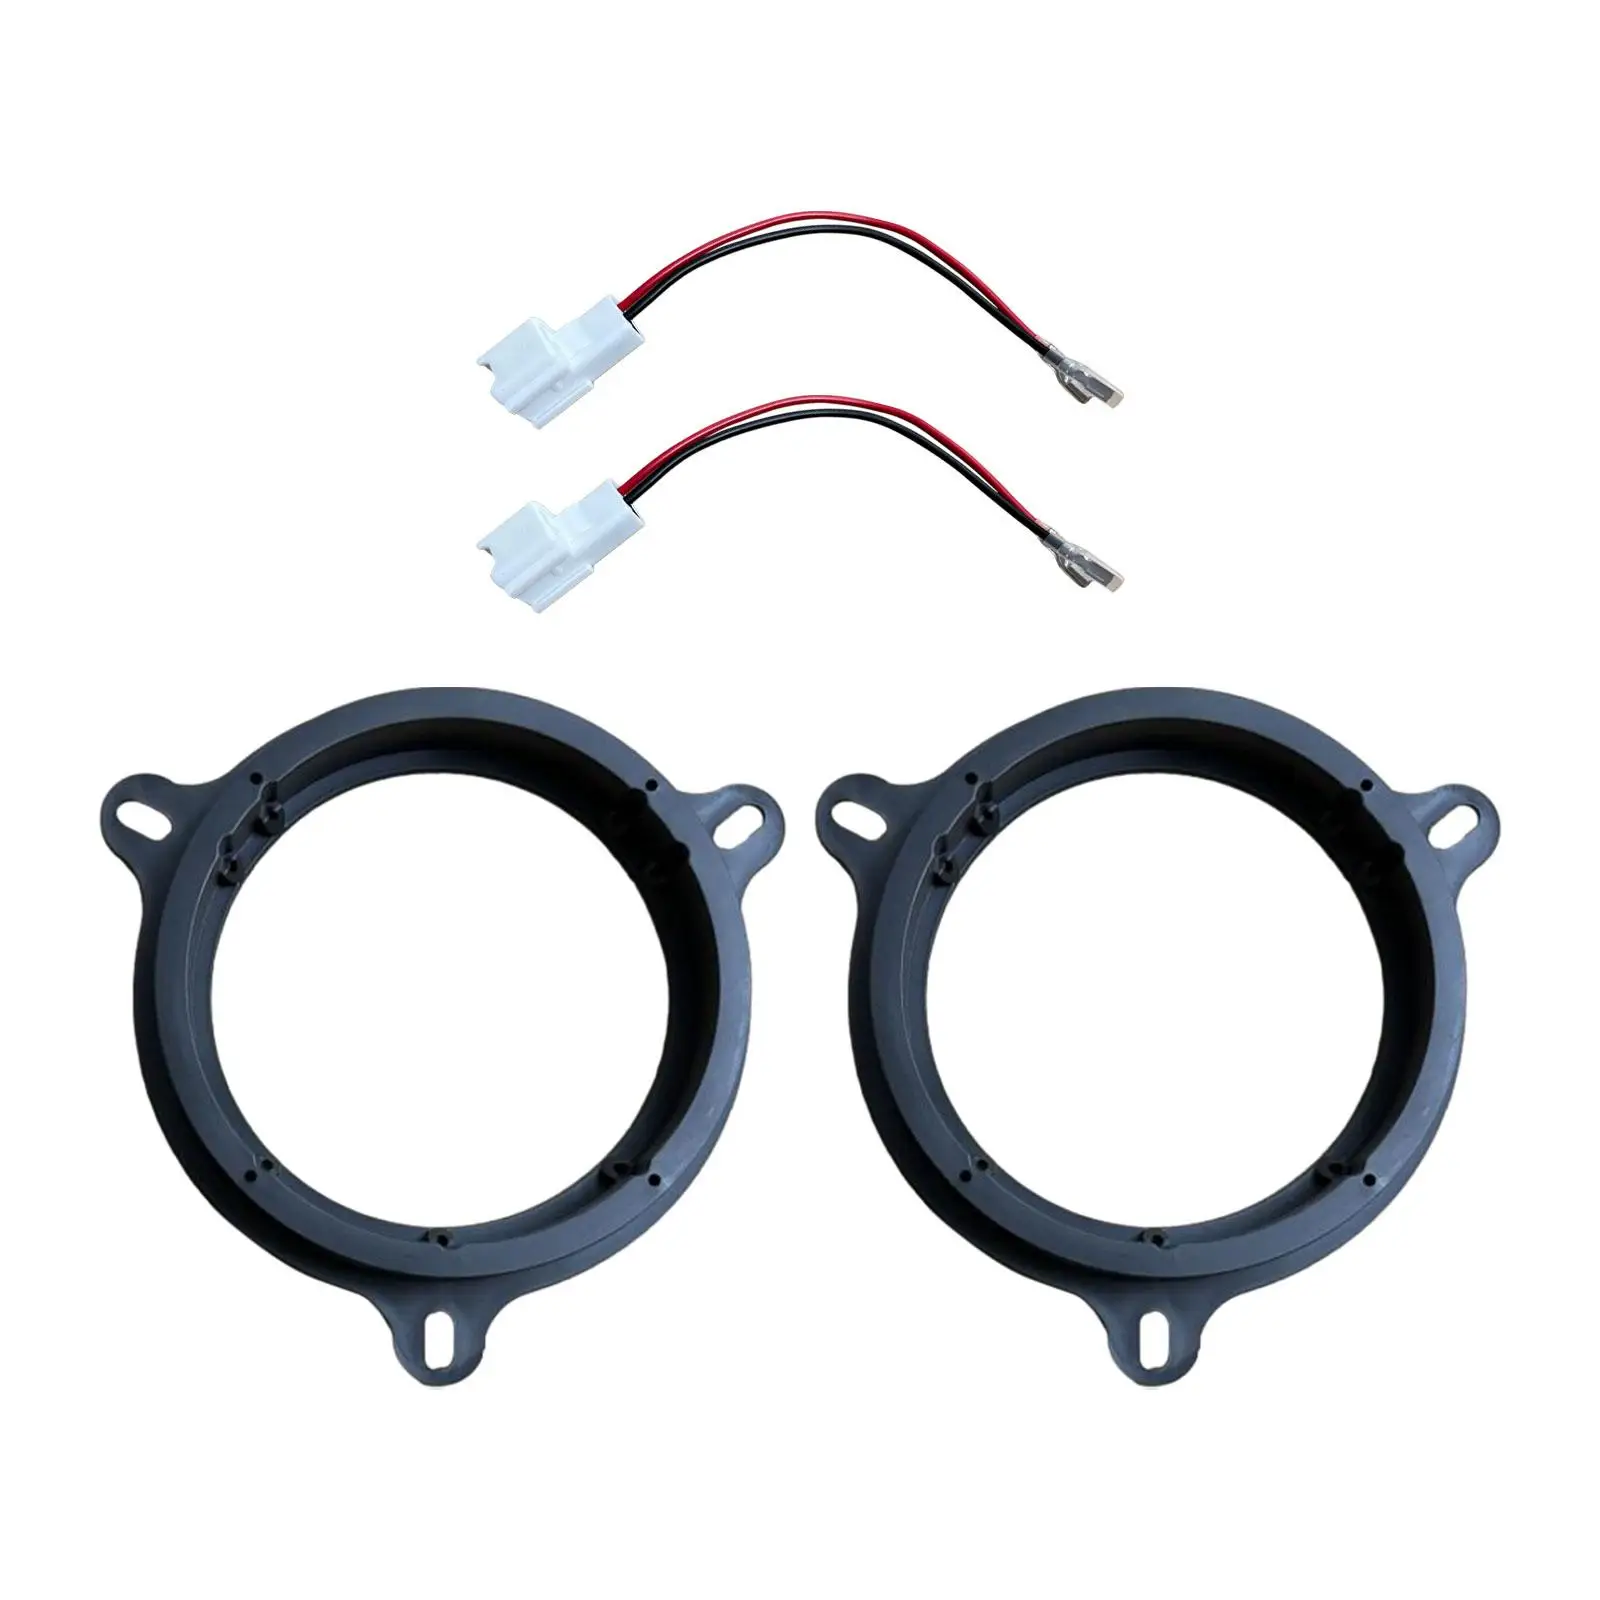 Wiring Harness Set Spacer Audio Washers Shims Mounting Mount Car Speaker Spacer Vehicles Gasket Universal Adapter